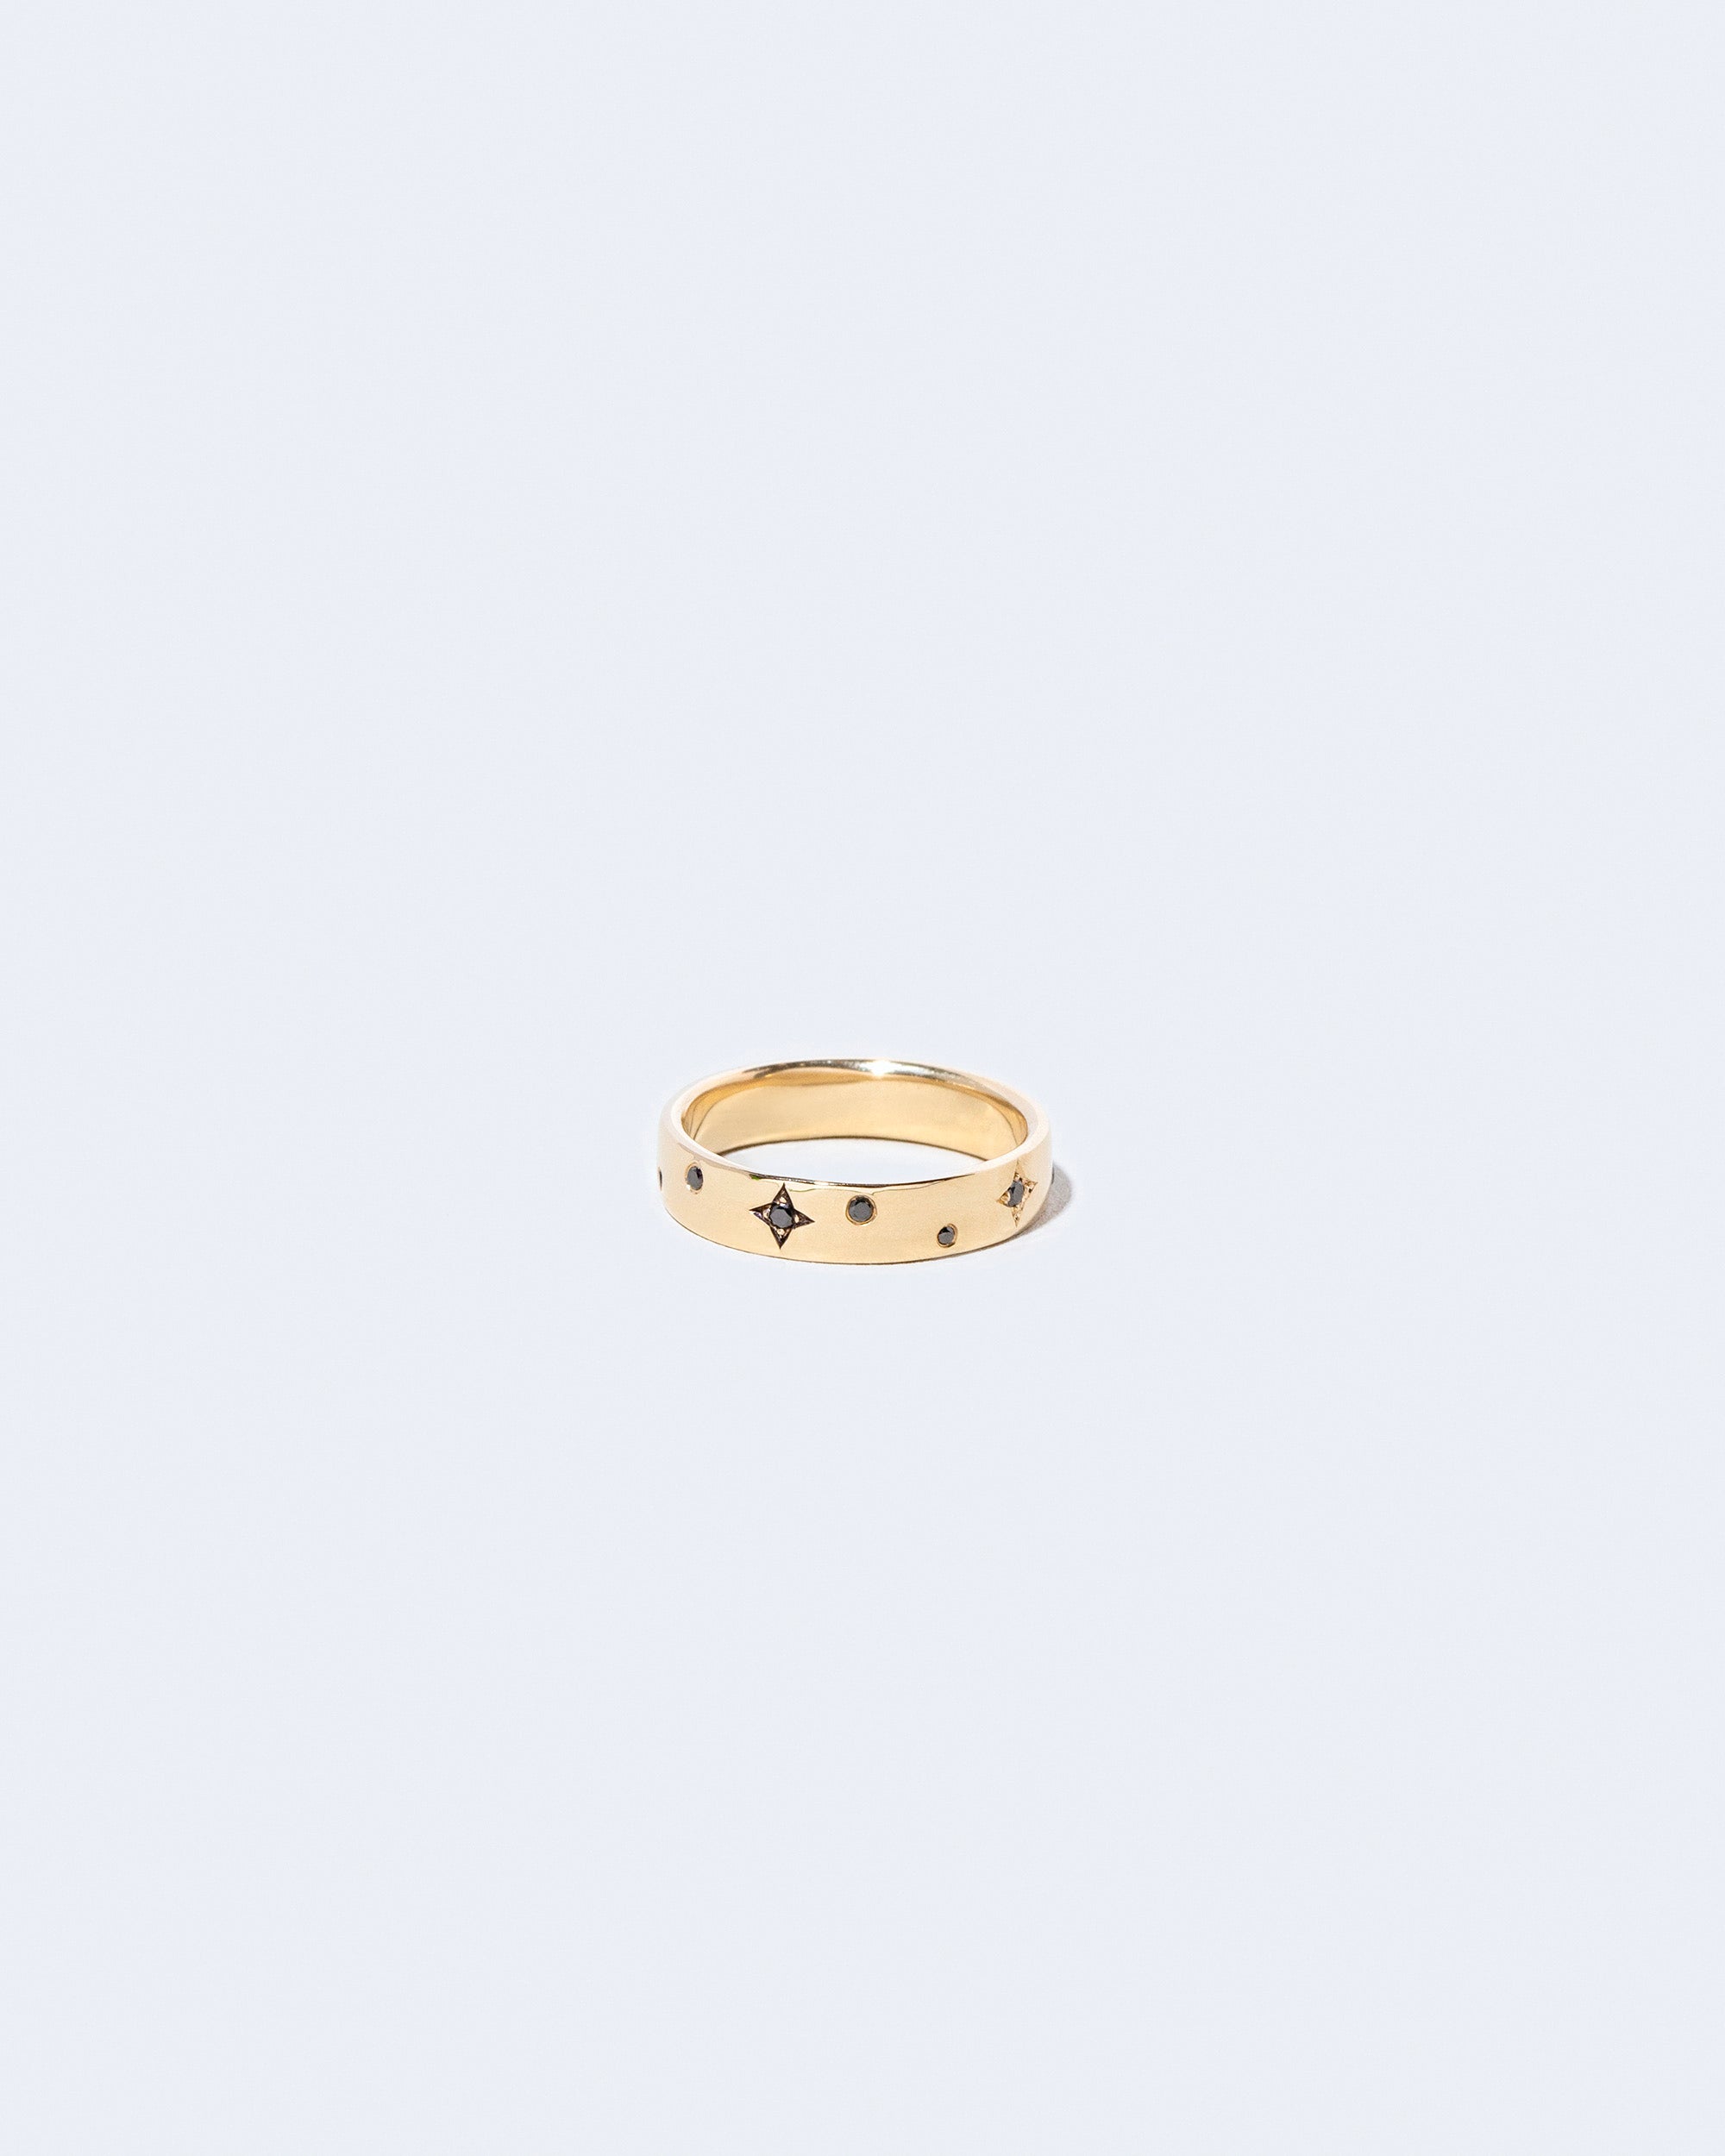 LOUIS VUITTON Women's Ring Gilded in Silvery